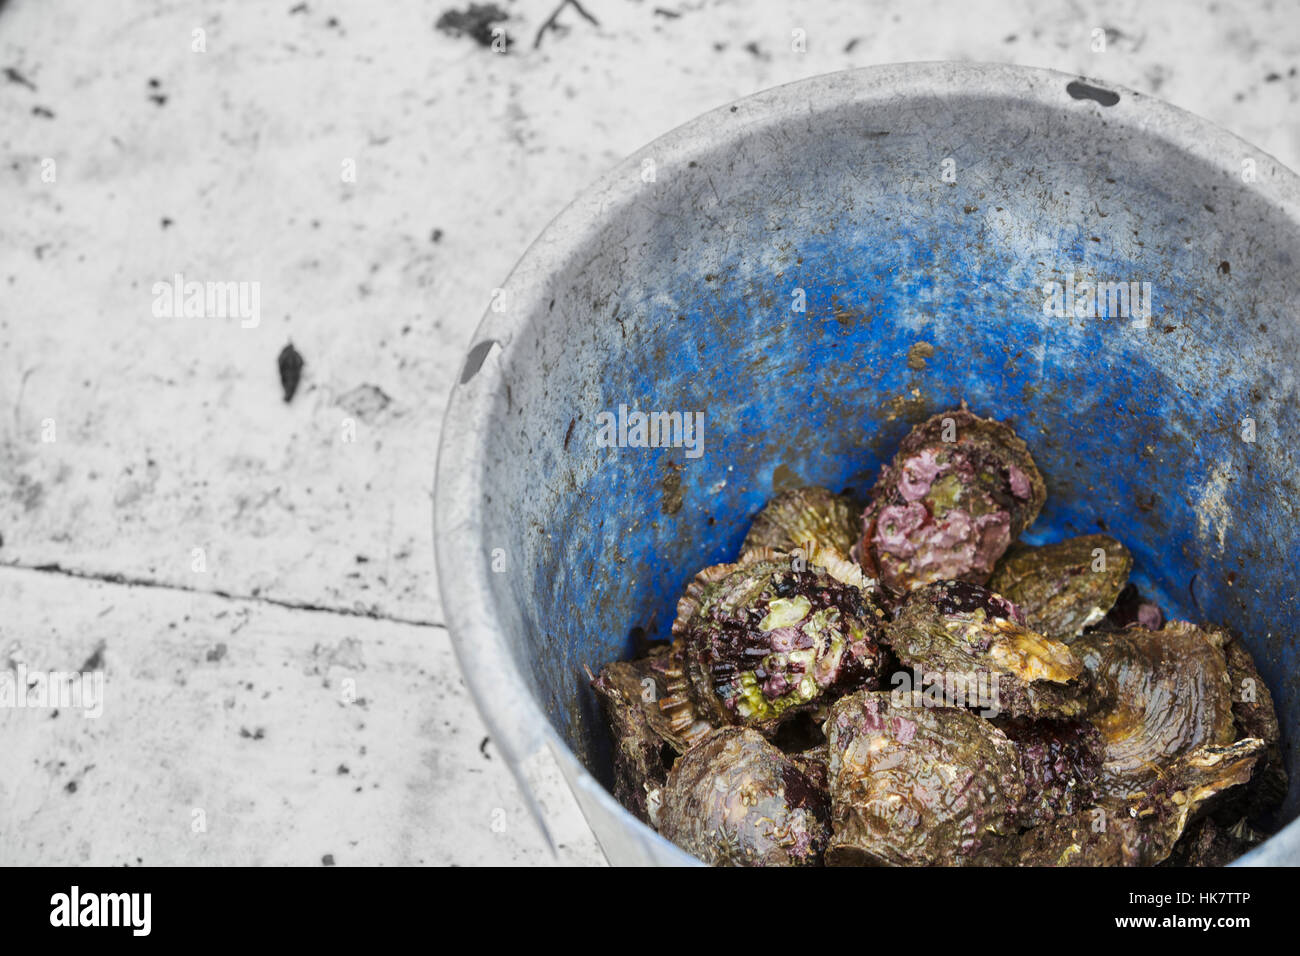 Traditional Sustainable Oyster Fishing. A bucket full of oysters. Stock Photo